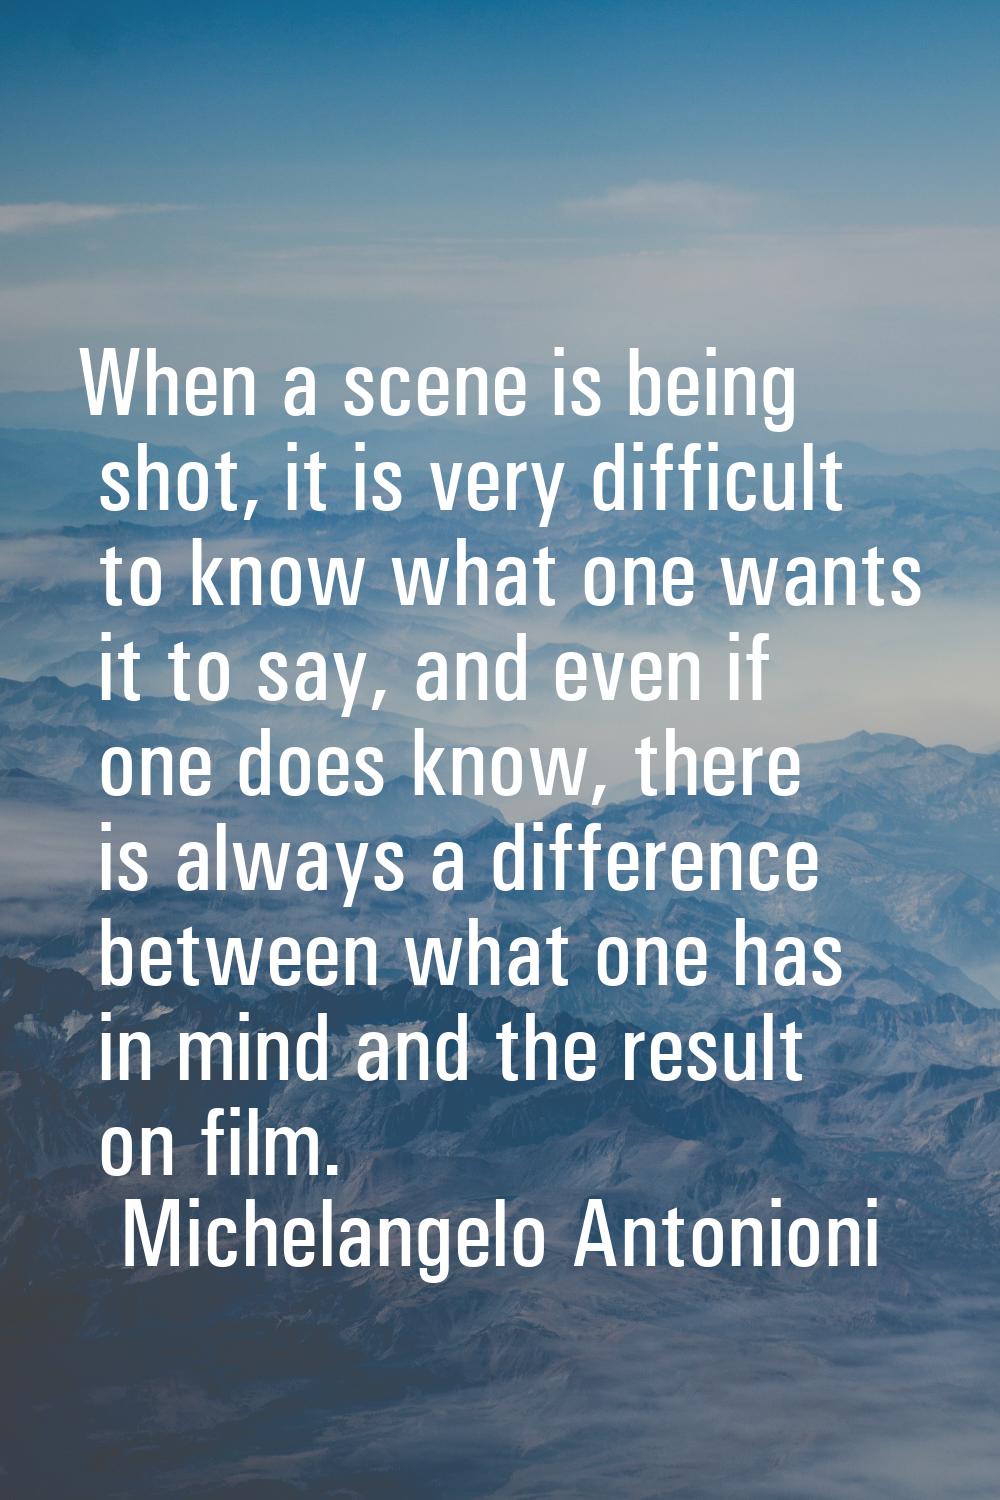 When a scene is being shot, it is very difficult to know what one wants it to say, and even if one 